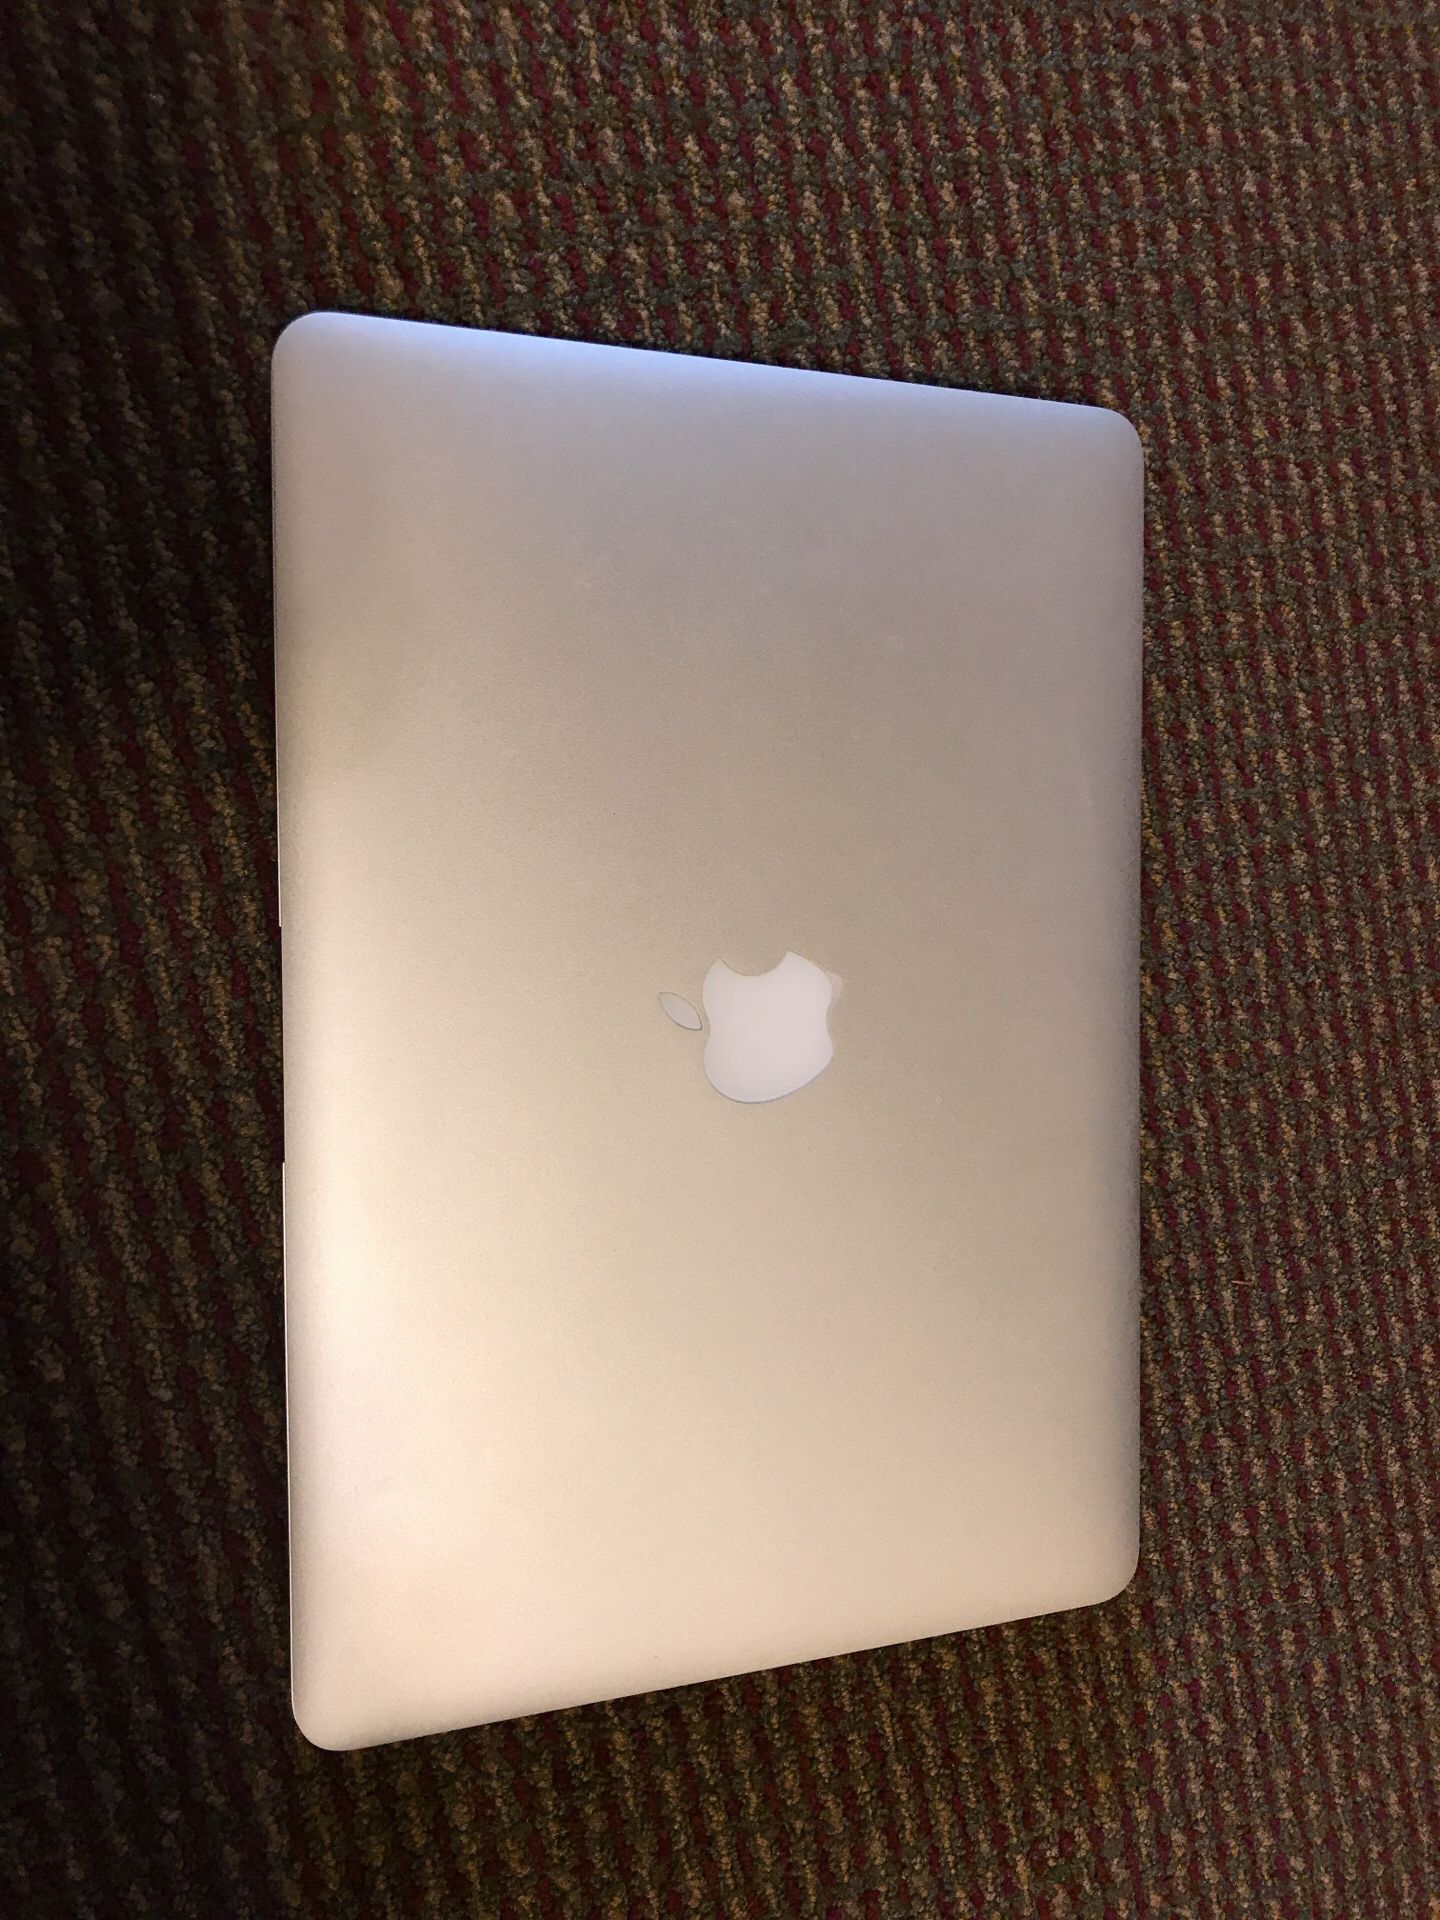 MacBook Air-posted August 20, 2019